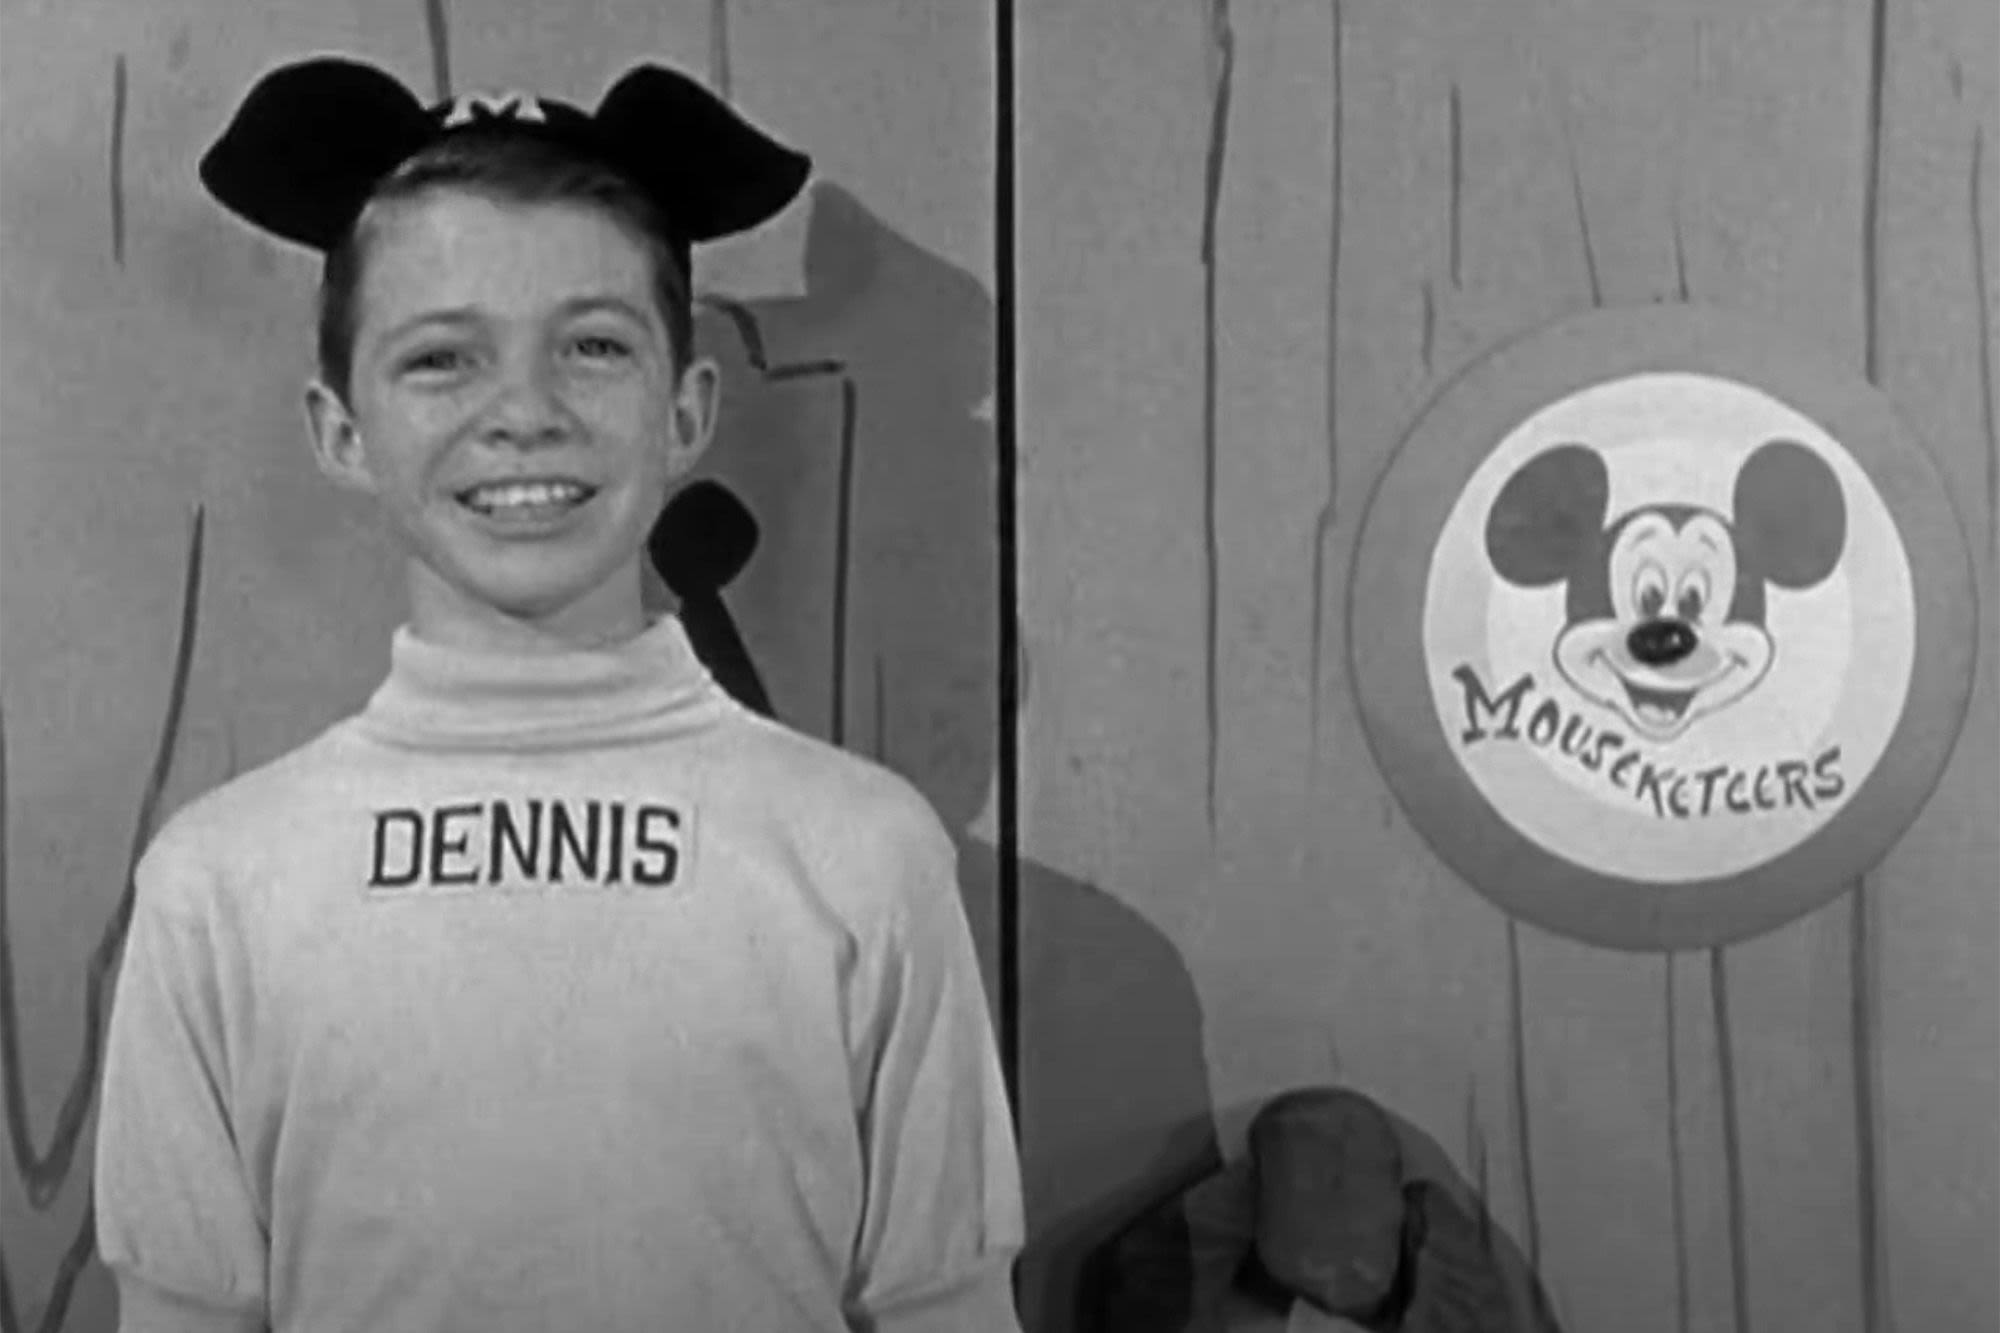 Man sentenced to jail in connection with the death of original “Mickey Mouse Club” member Dennis Day